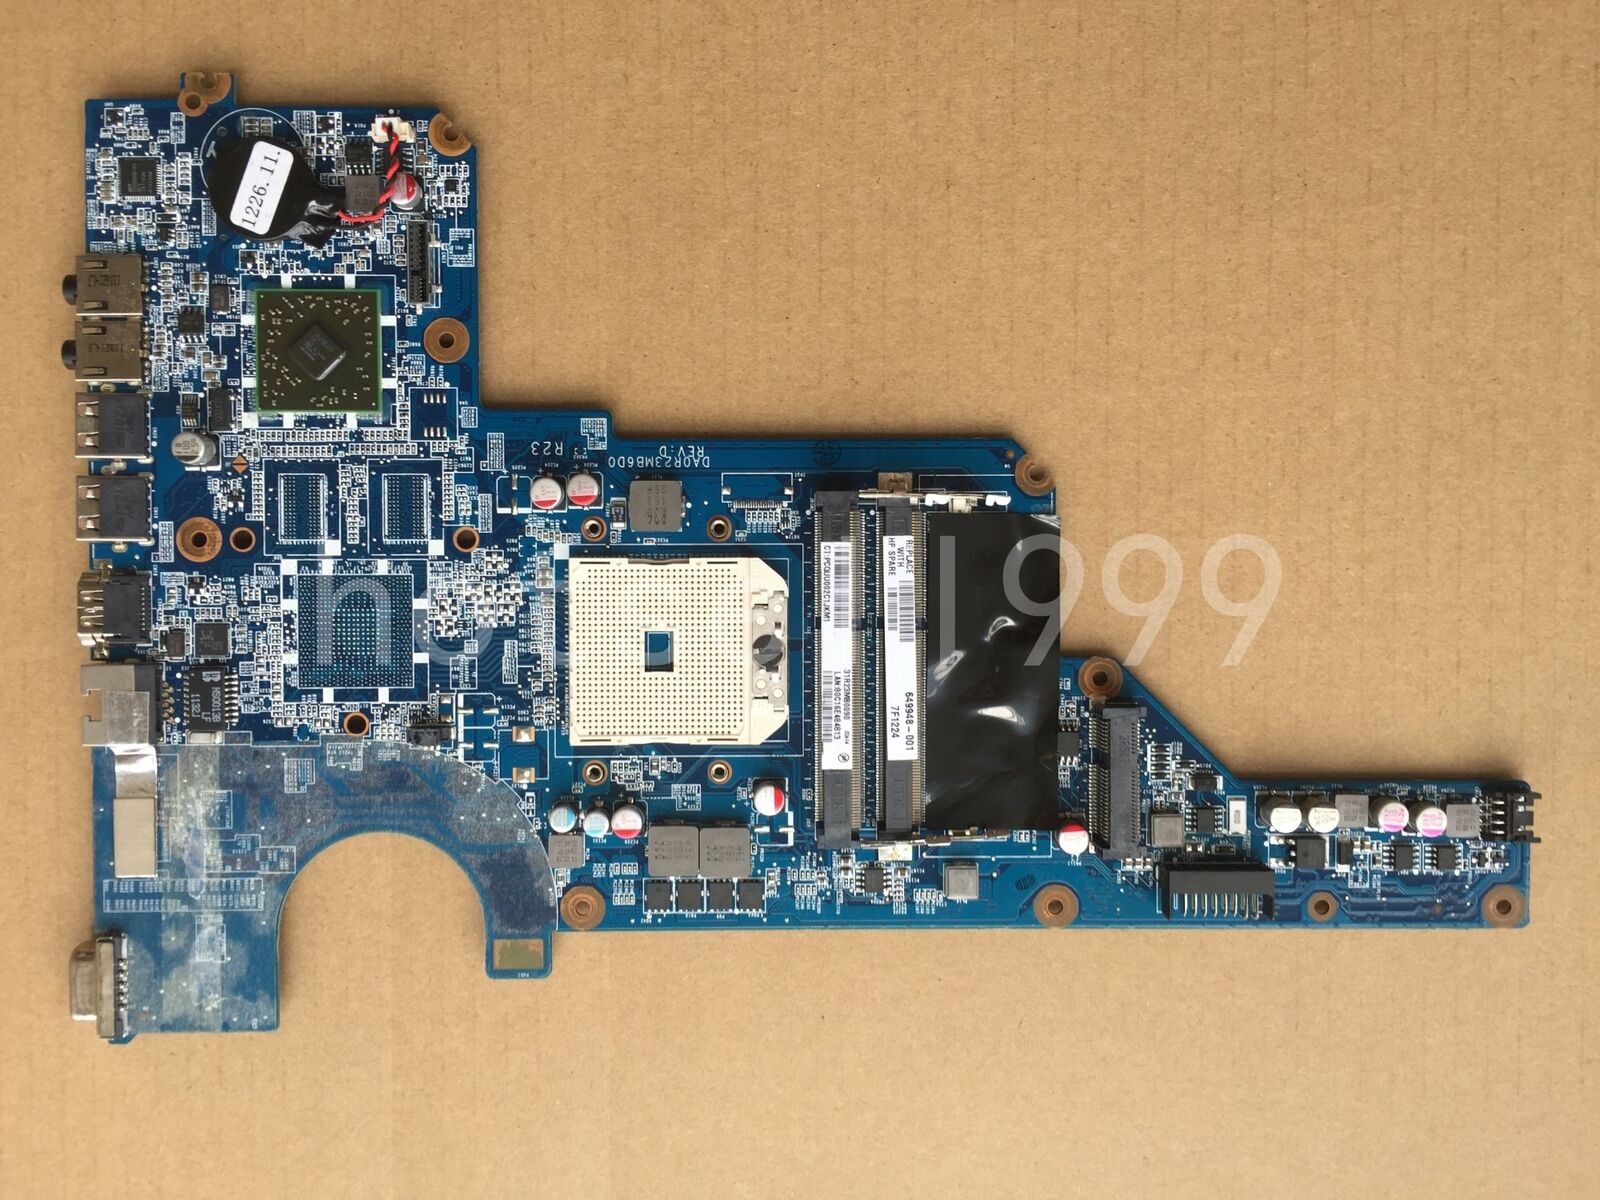 HP PAVILION G4 G6 G6-1000 G7 SERIES LAPTOP MOTHERBOARD P/N 649948-001 Compatible CPU Brand: AMD Non-Domestic - Click Image to Close